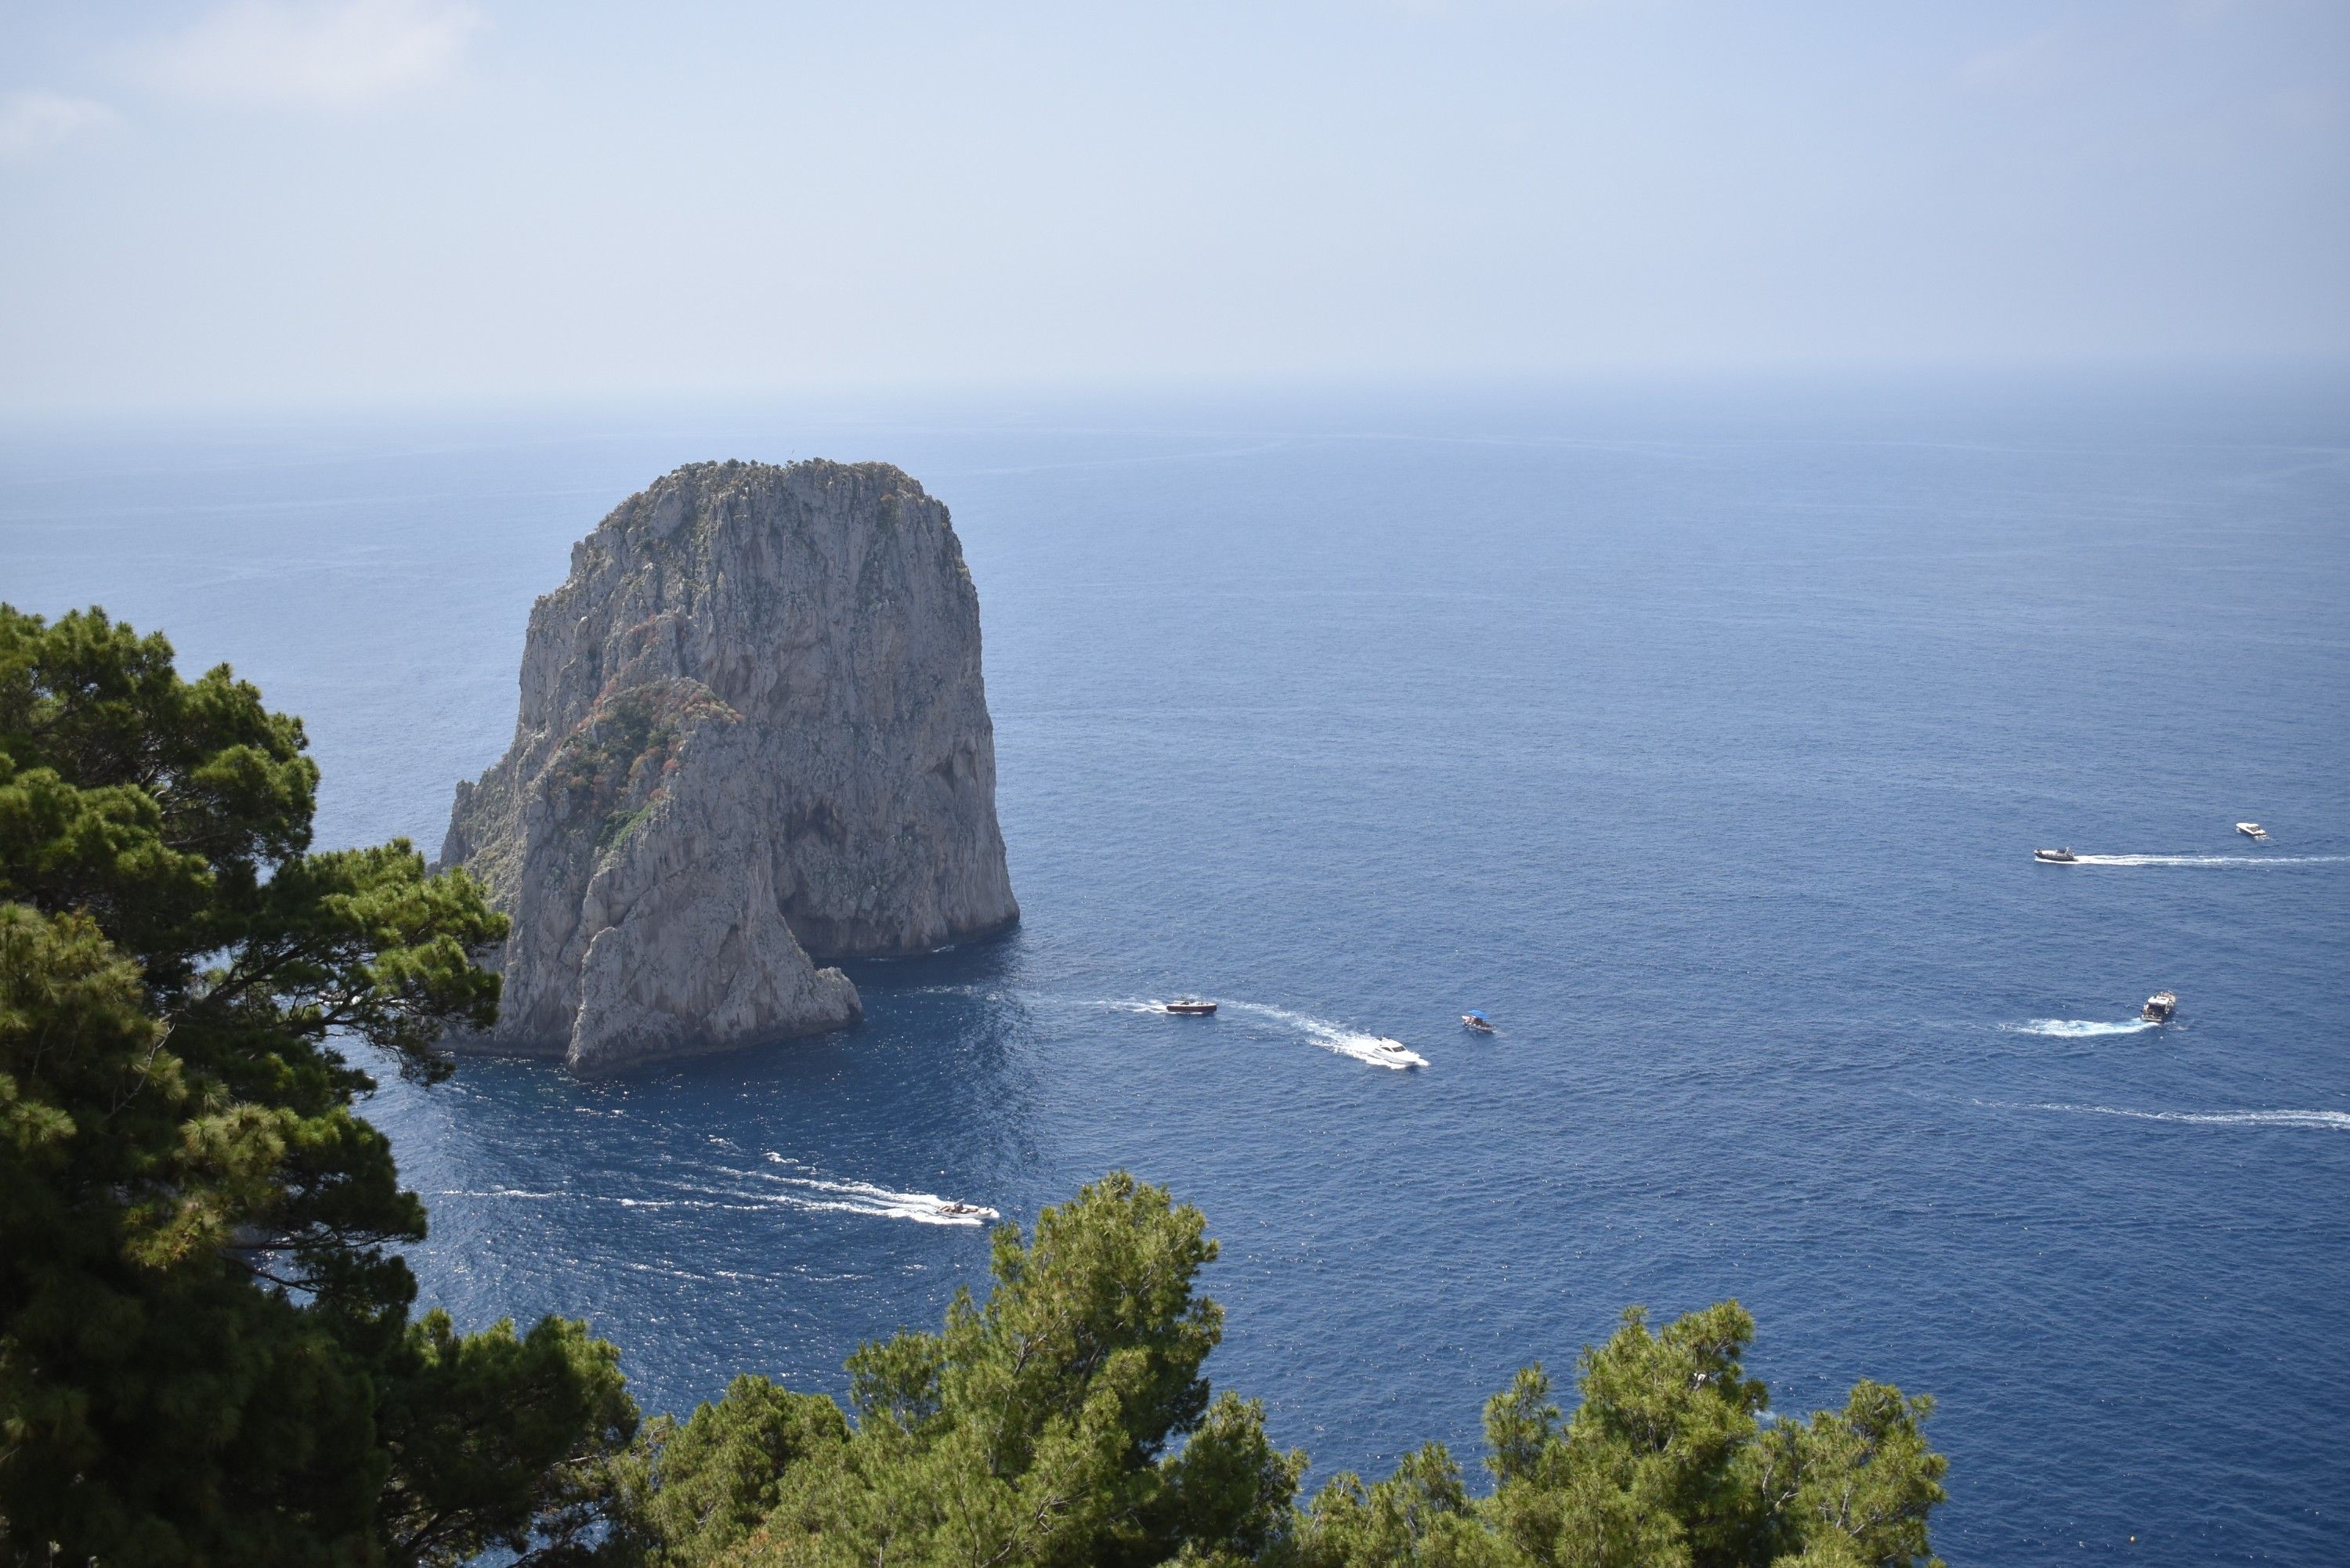 Caption: A photo of a towering rock formation in the sea and several boats roaming around it. (Local Guide @MoniDi)